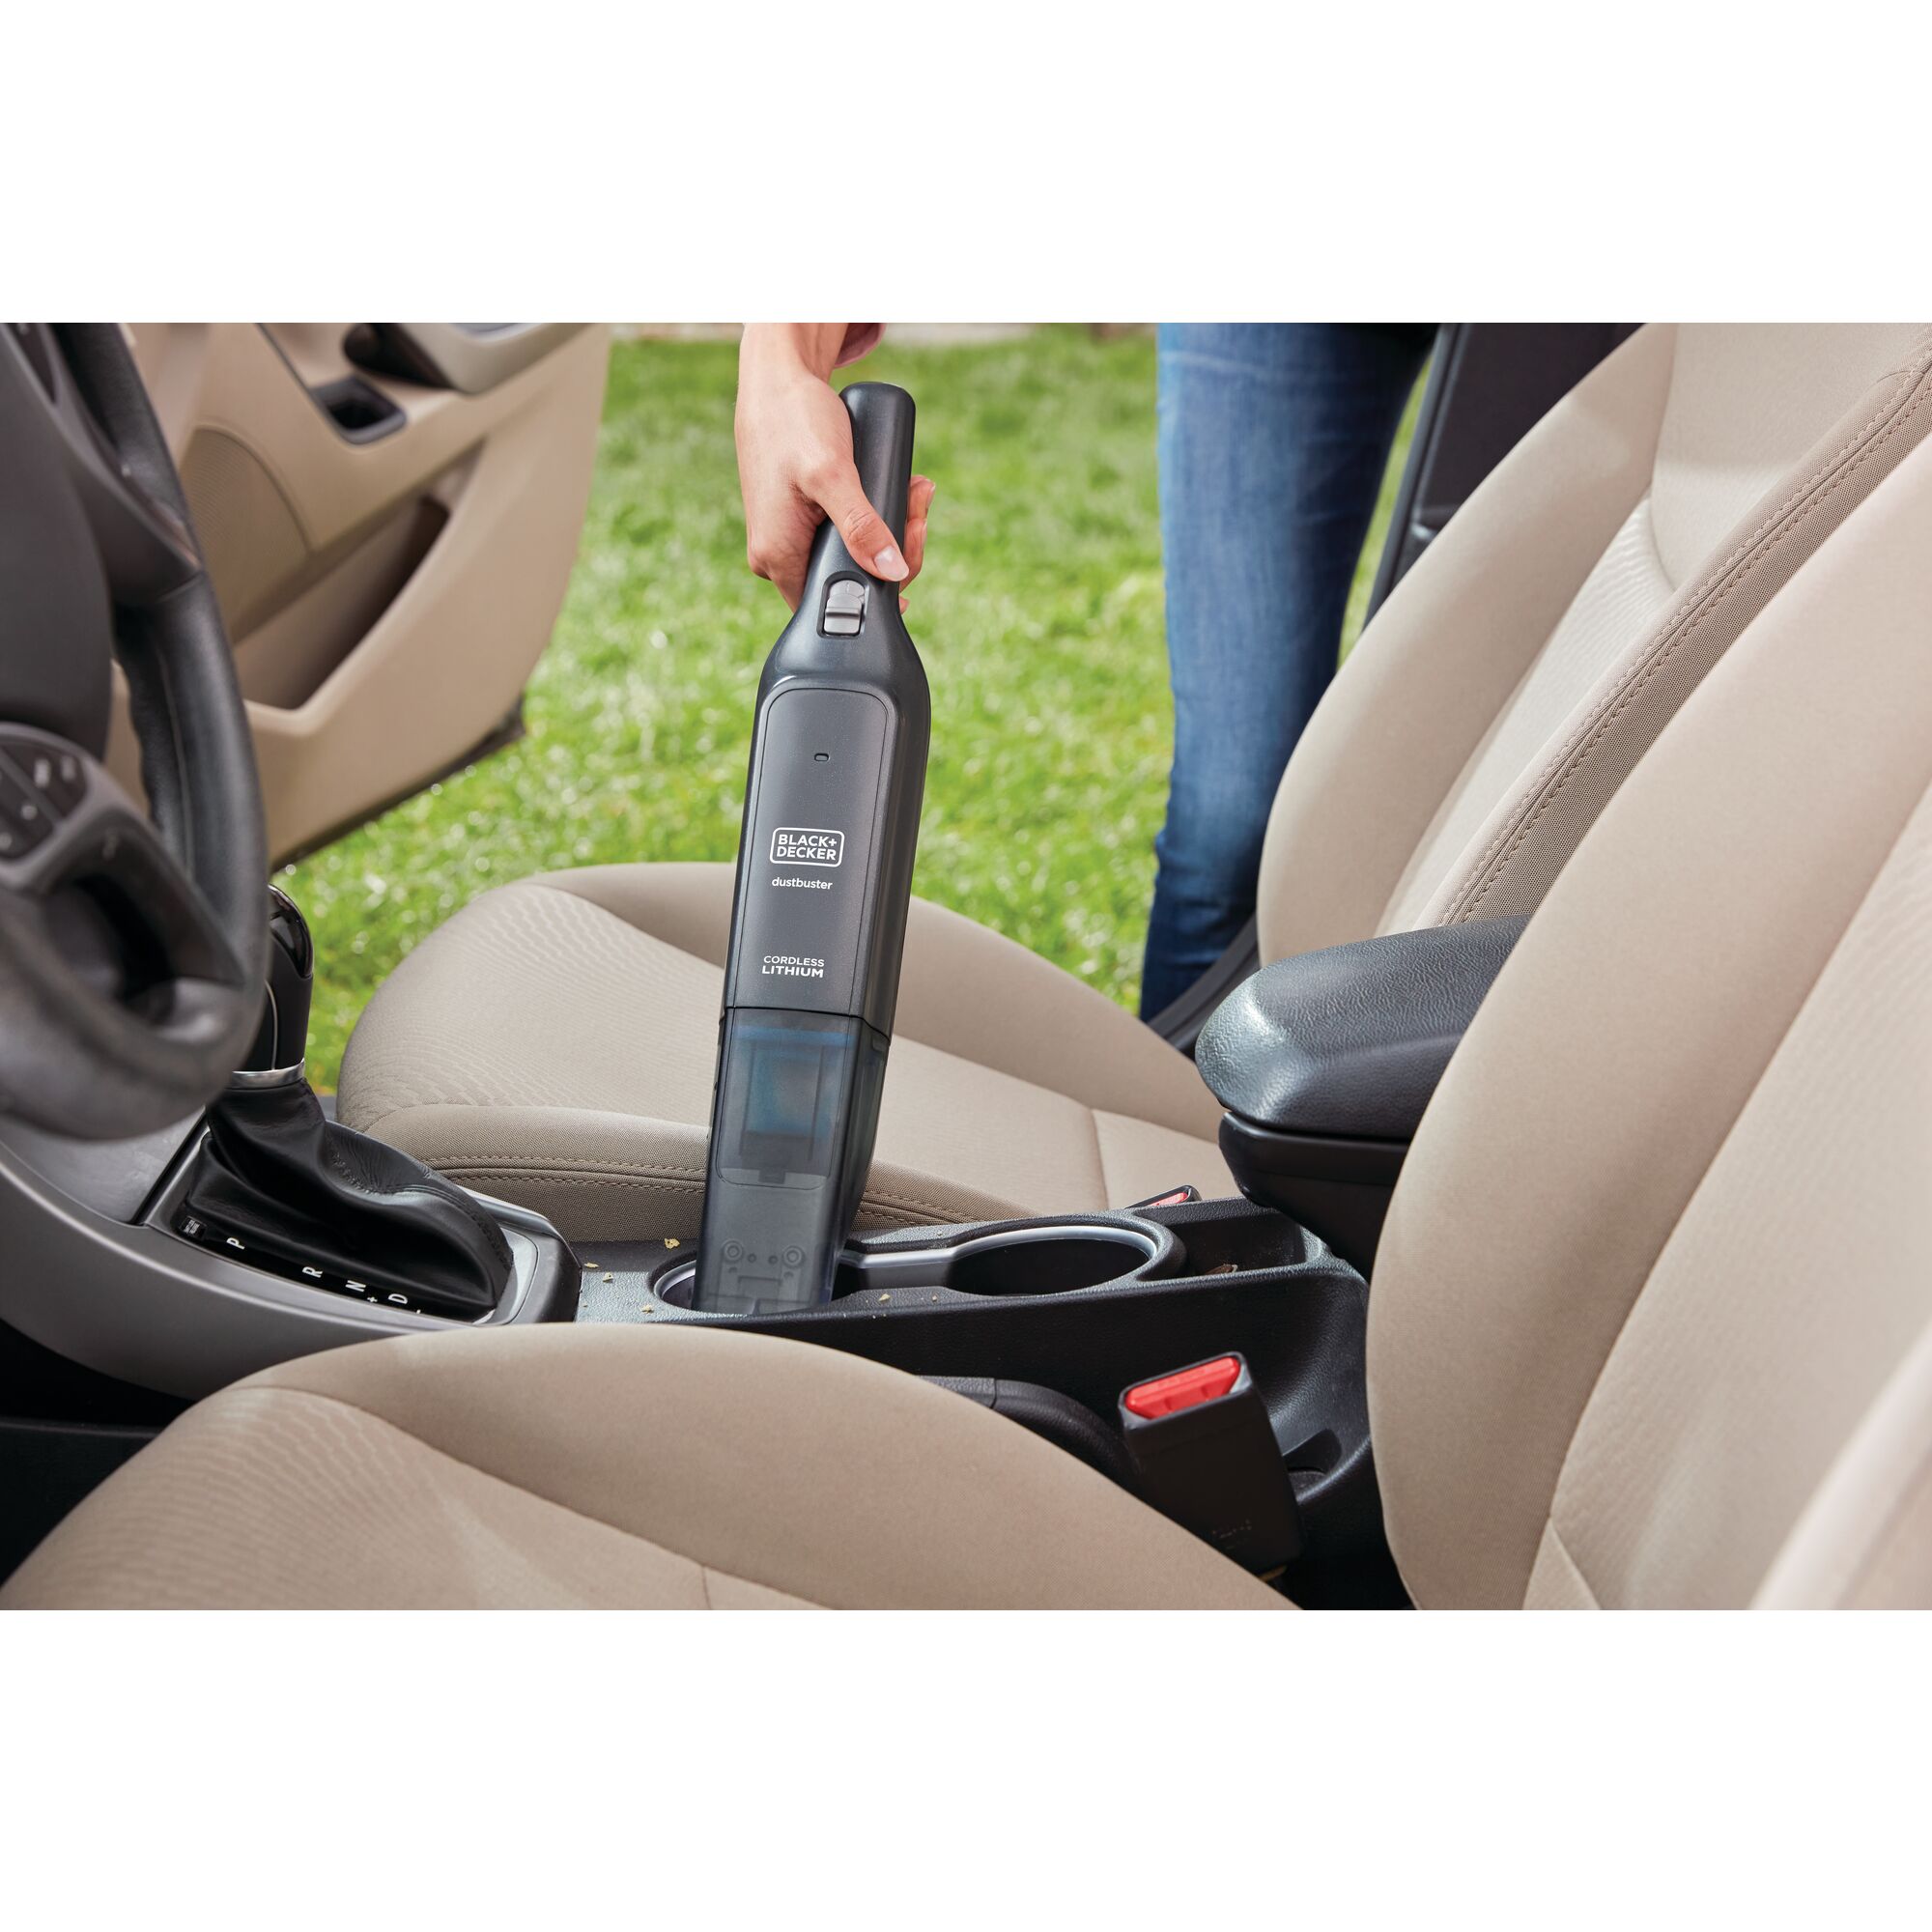 Dust buster 12 Volt Advanced Clean Cordless Hand Vacuum being used in car.